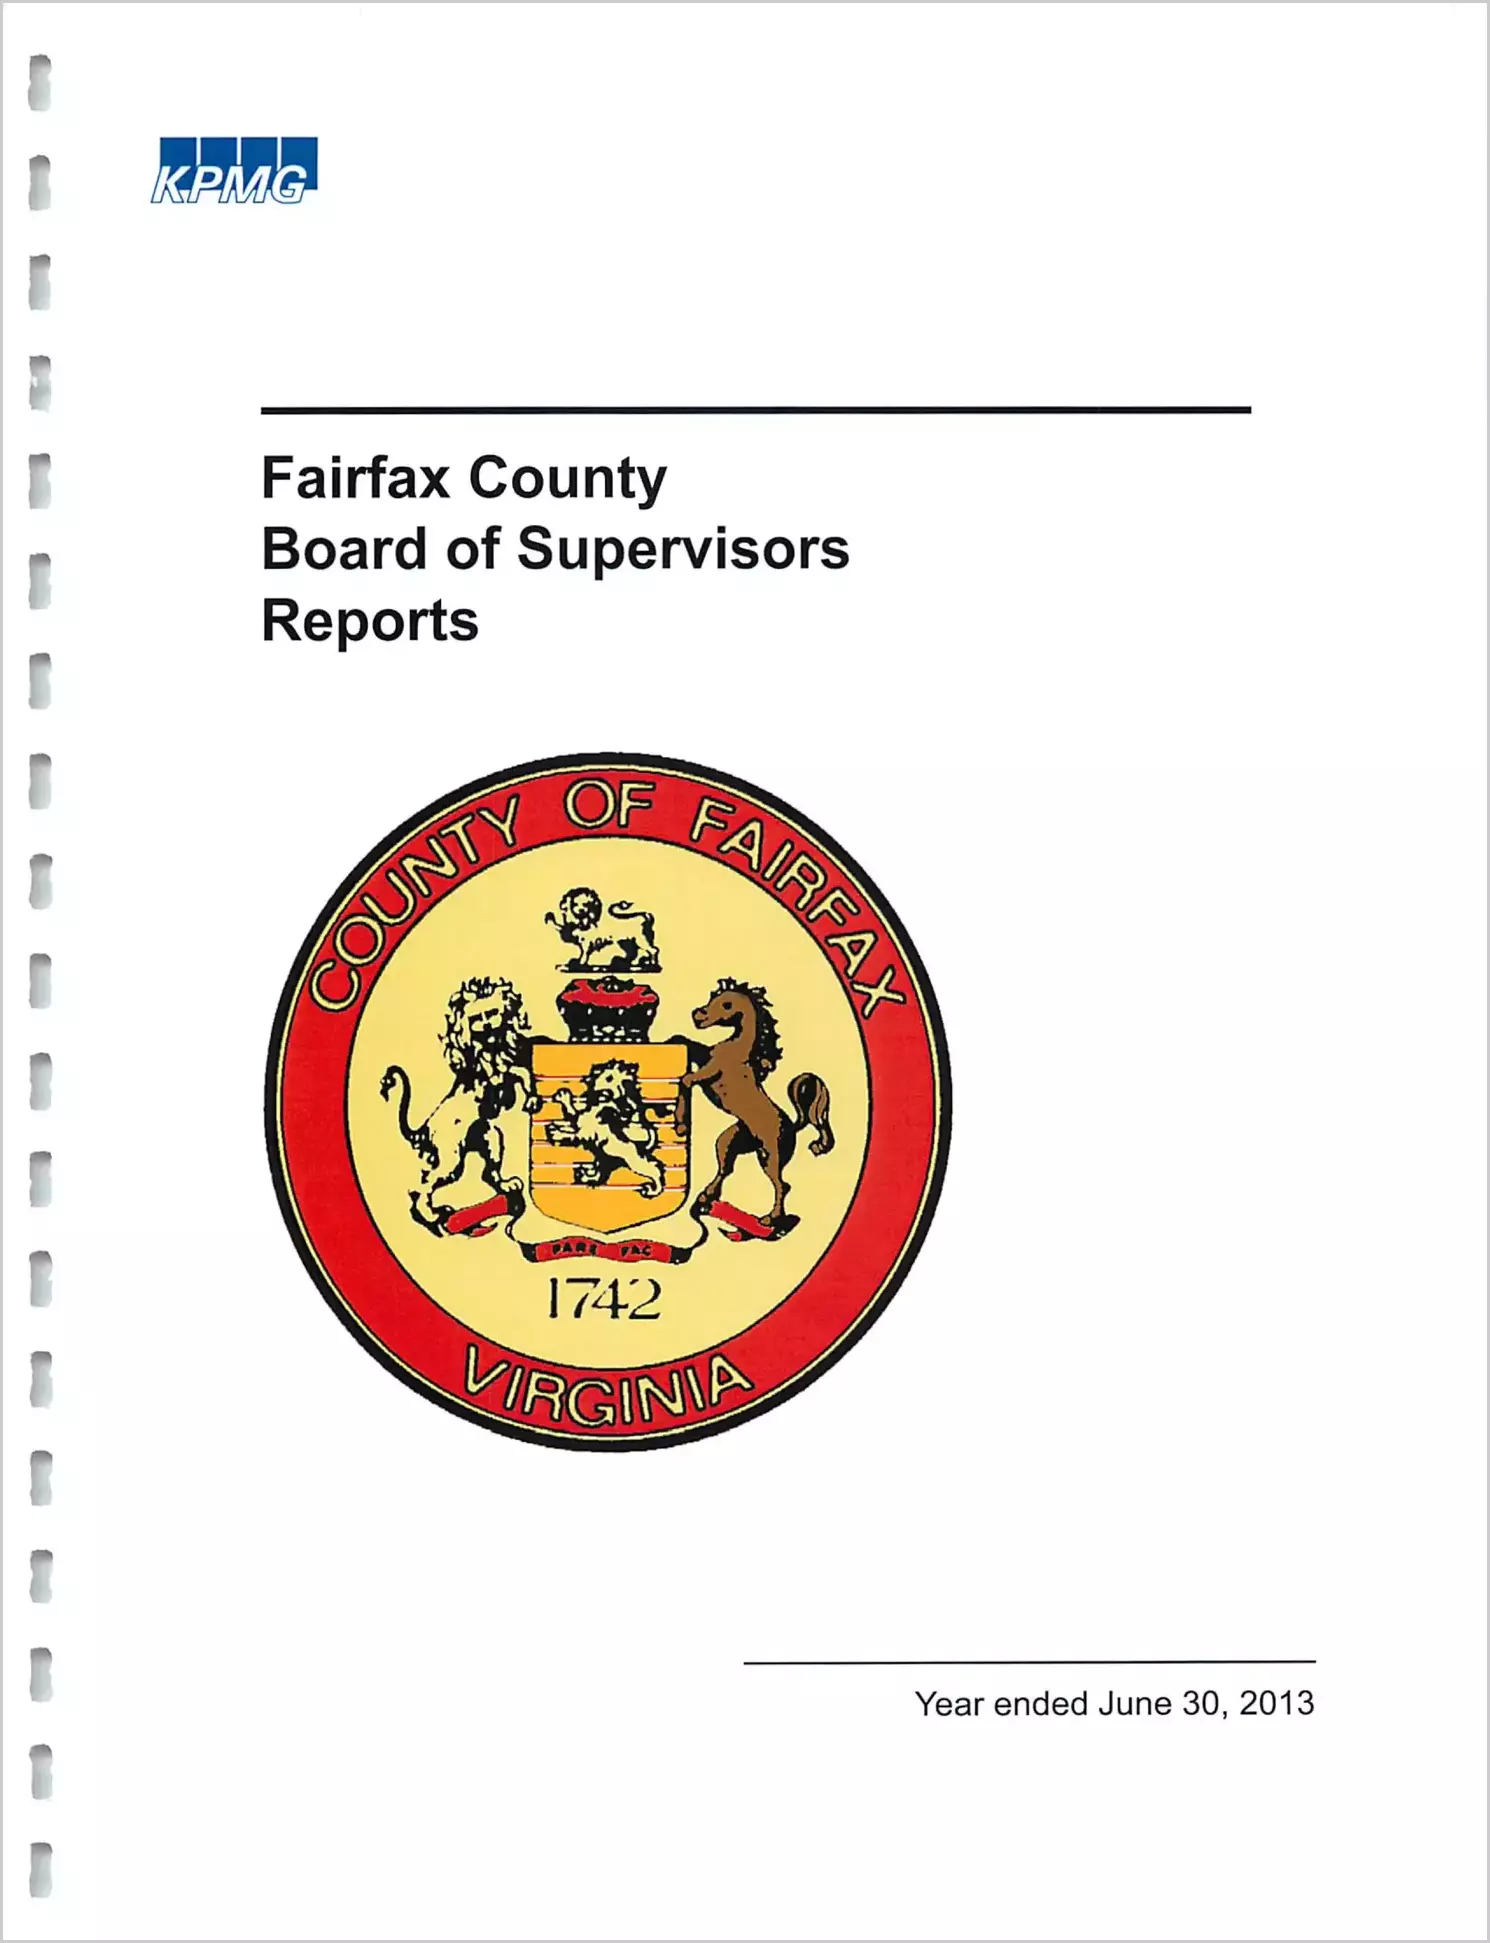 2013 Internal Control and Compliance Report for County of Fairfax